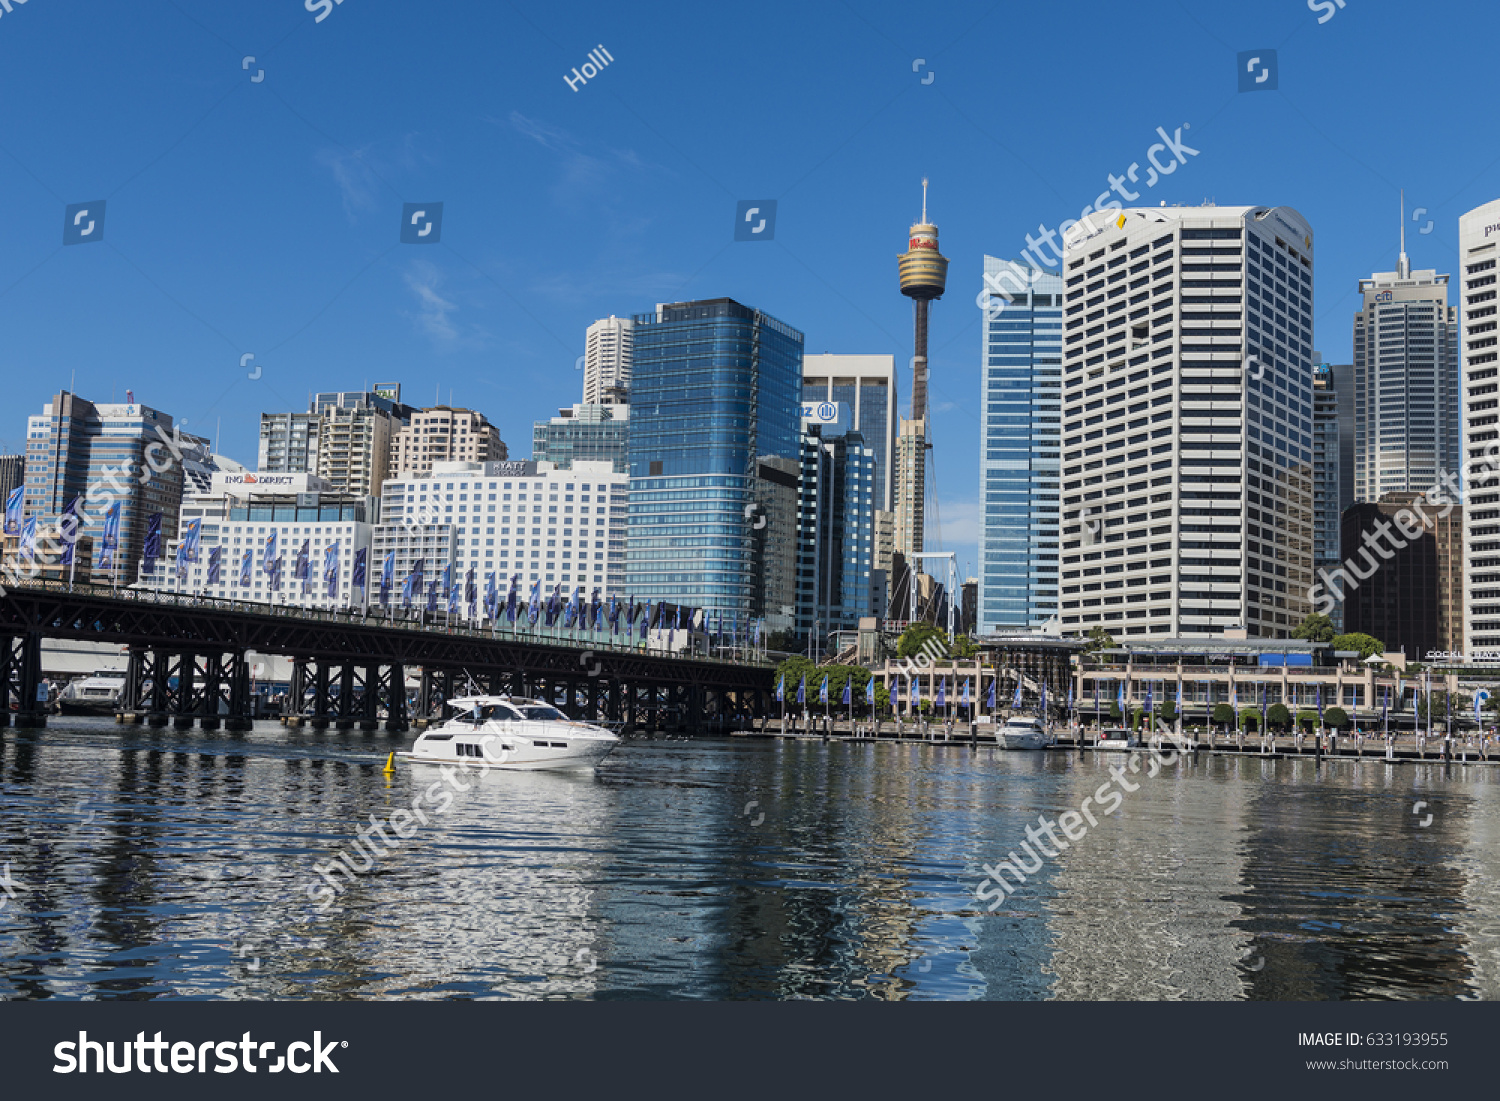 Darling Harbour, Sydney, Australia - March 27, 2017. View of Darling Harbour, Sydney CBD, New South Wales, Australia. #633193955